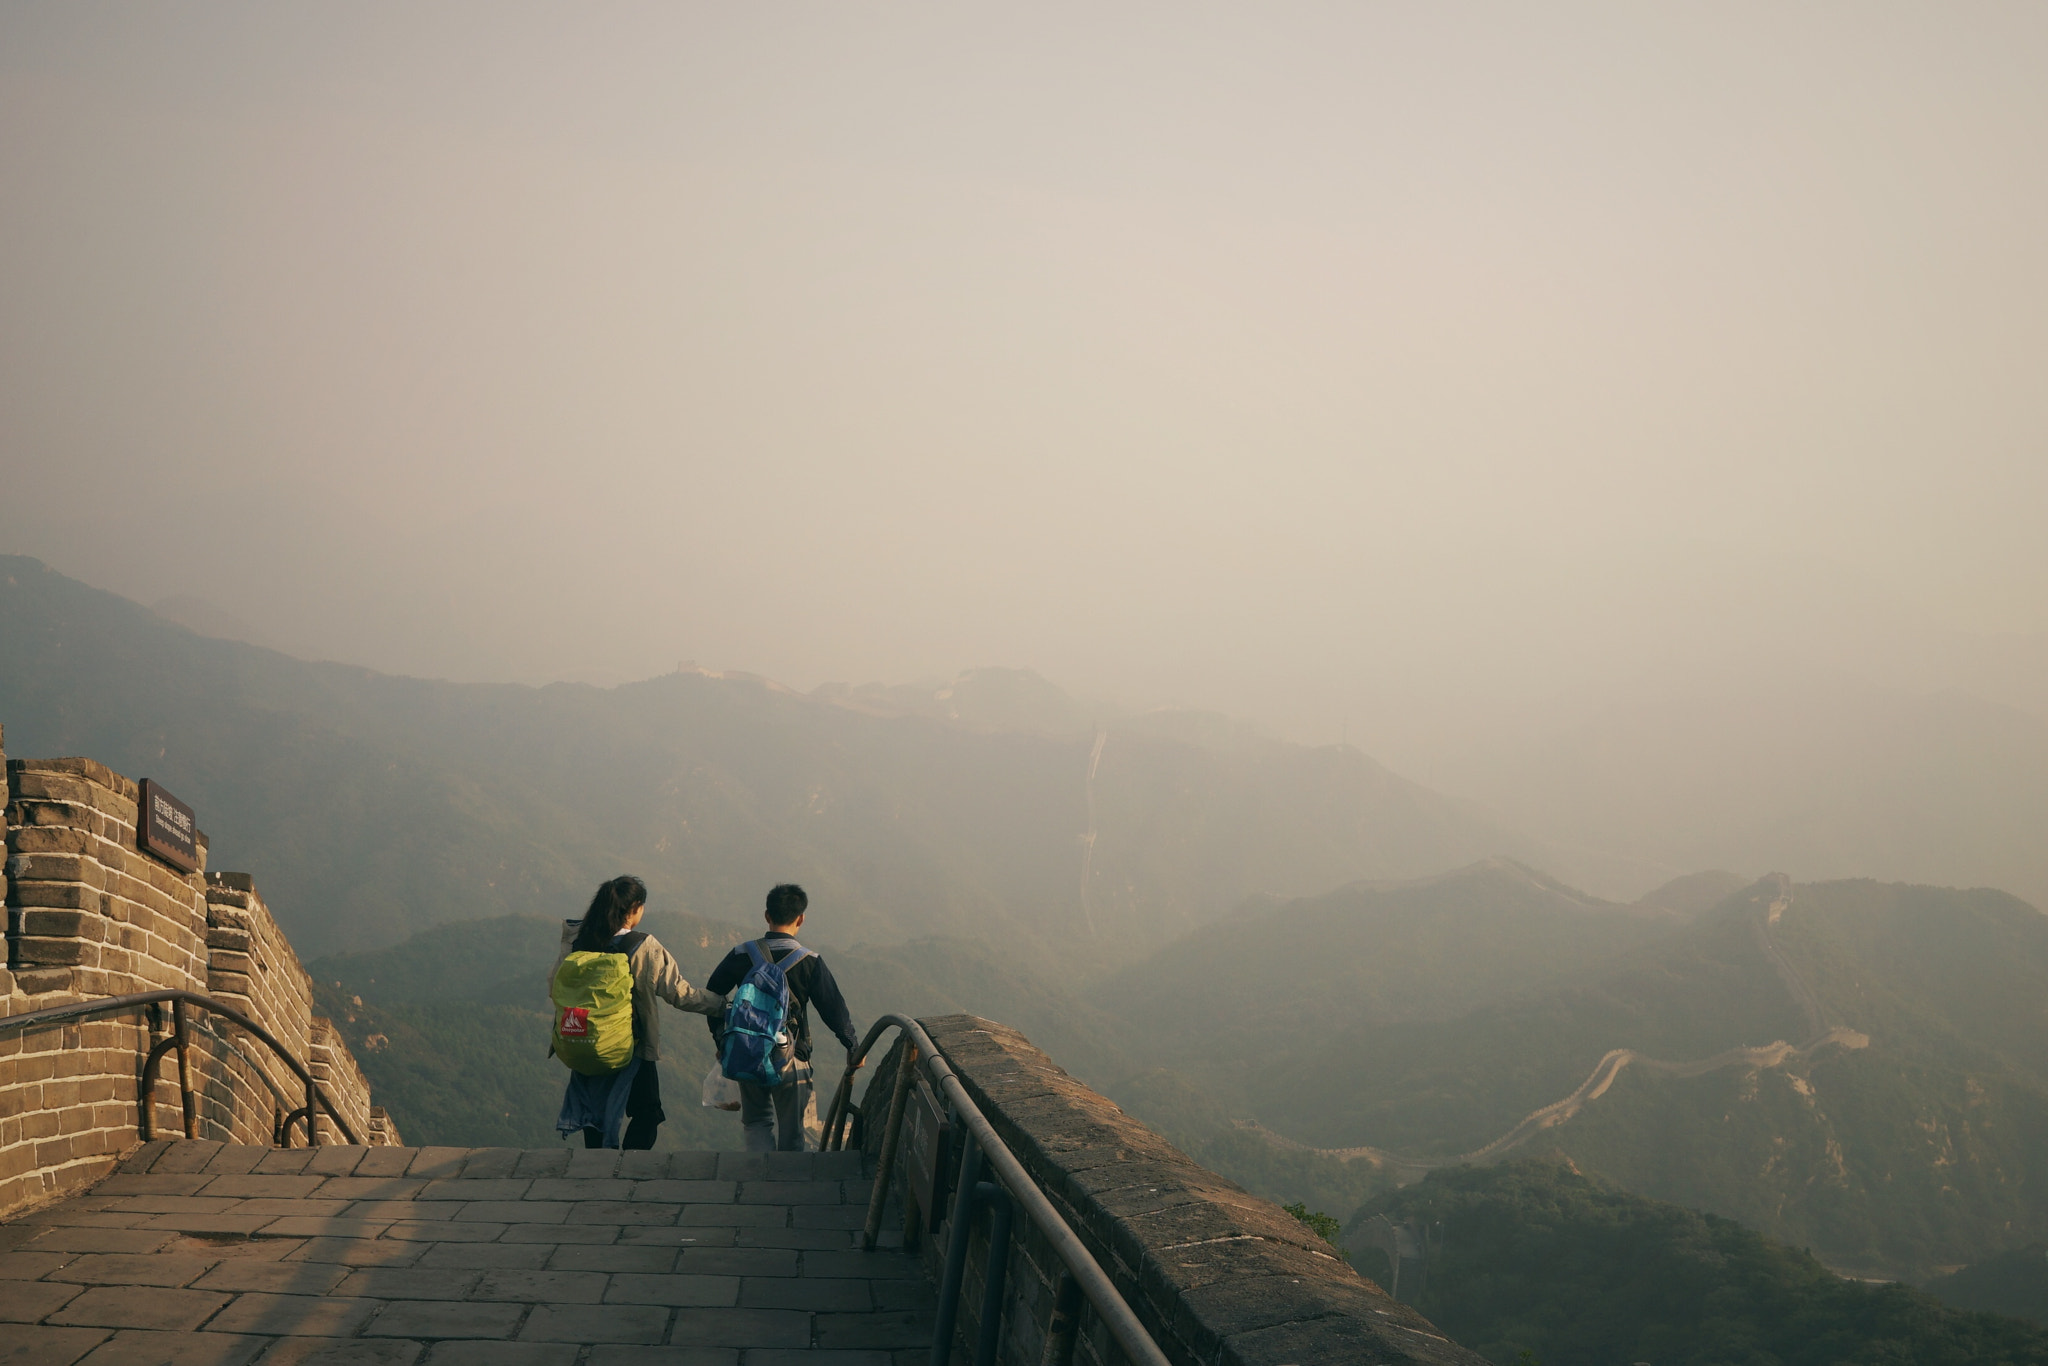 Sony a7 + Sony FE 28mm F2 sample photo. Badaling great wall - a smoggy day photography